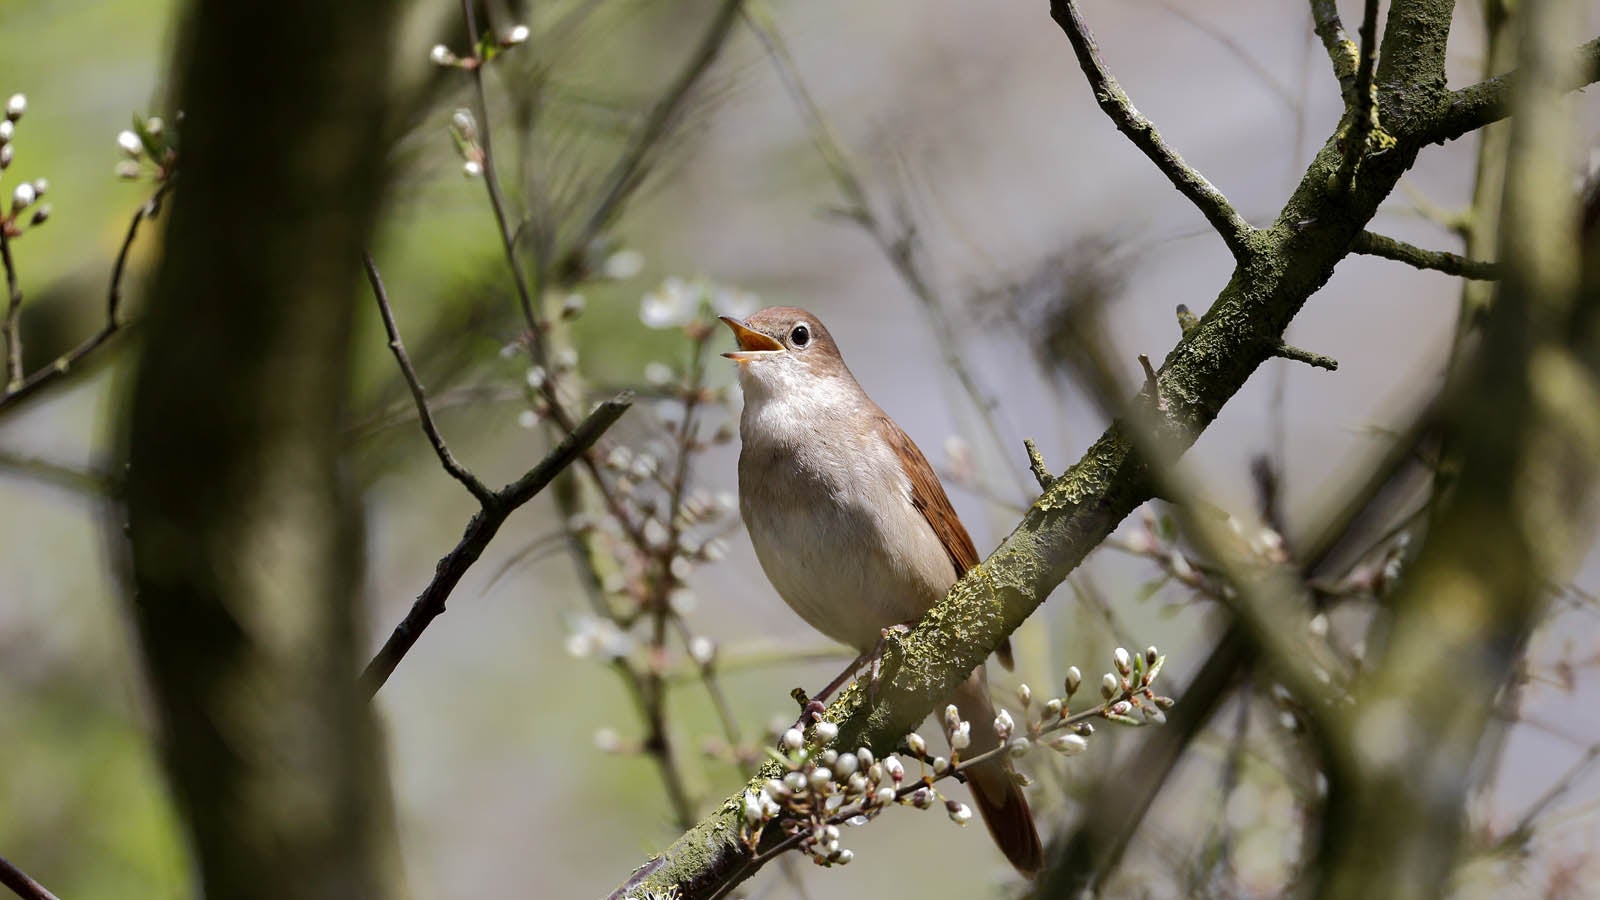 A nightingale sat on a branch of a tree